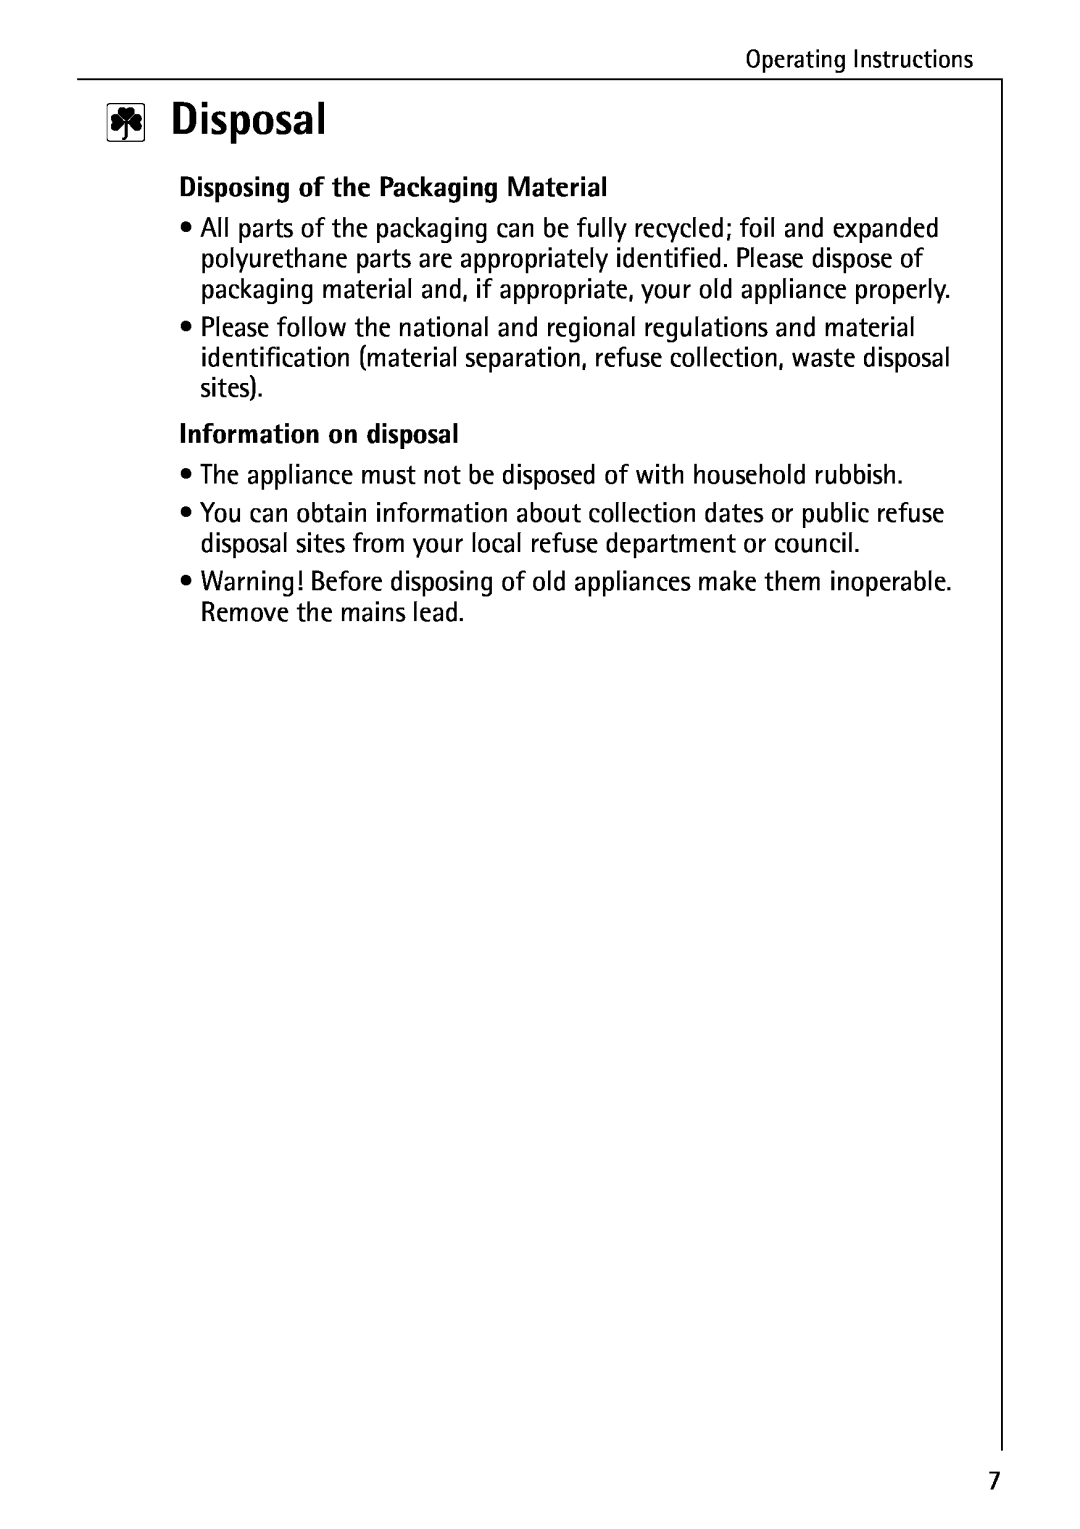 Electrolux C65030K operating instructions 2Disposal, Disposing of the Packaging Material, Information on disposal 